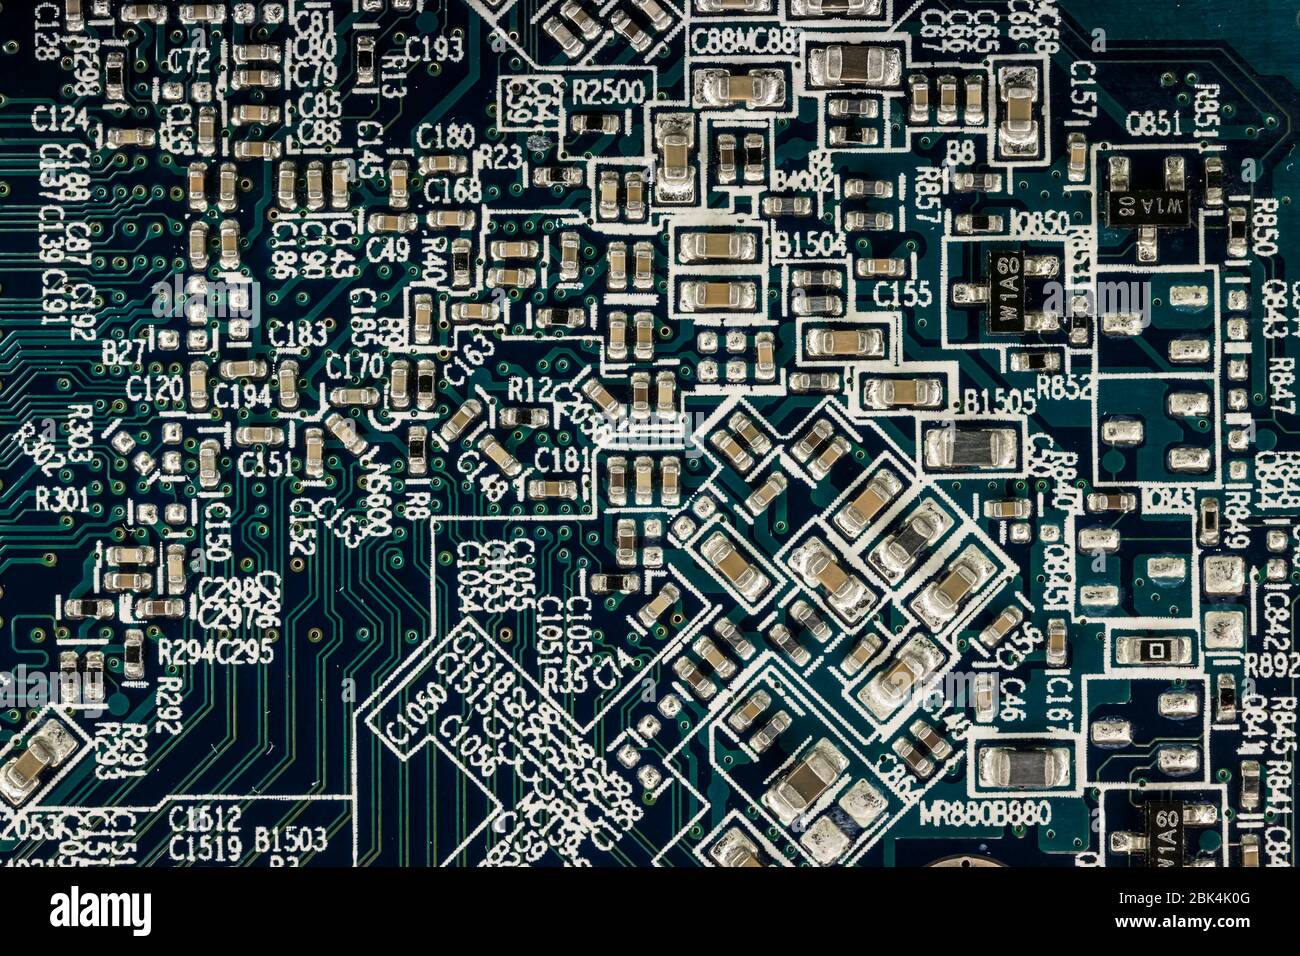 detail of an electronic board Stock Photo